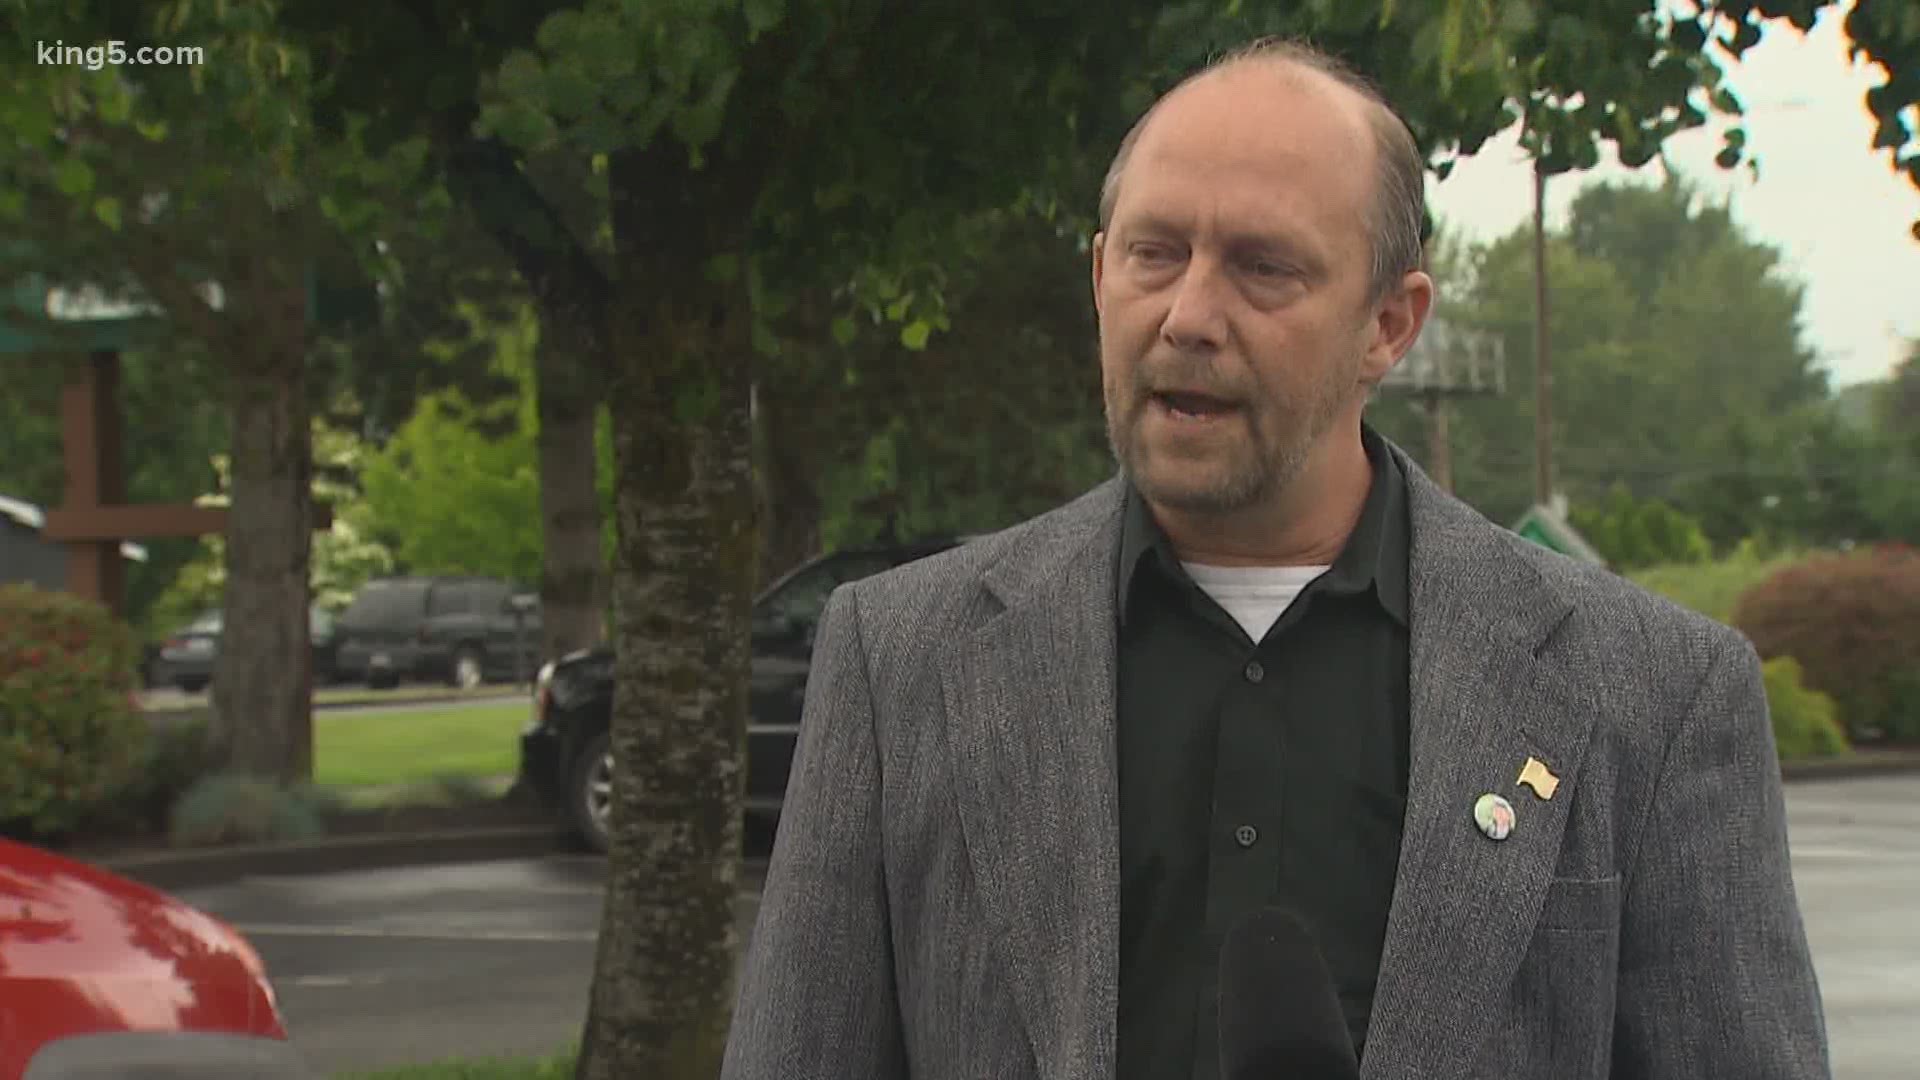 The now-former police chief in the city of Snohomish has been reassigned and there have been calls for the mayor to resign.